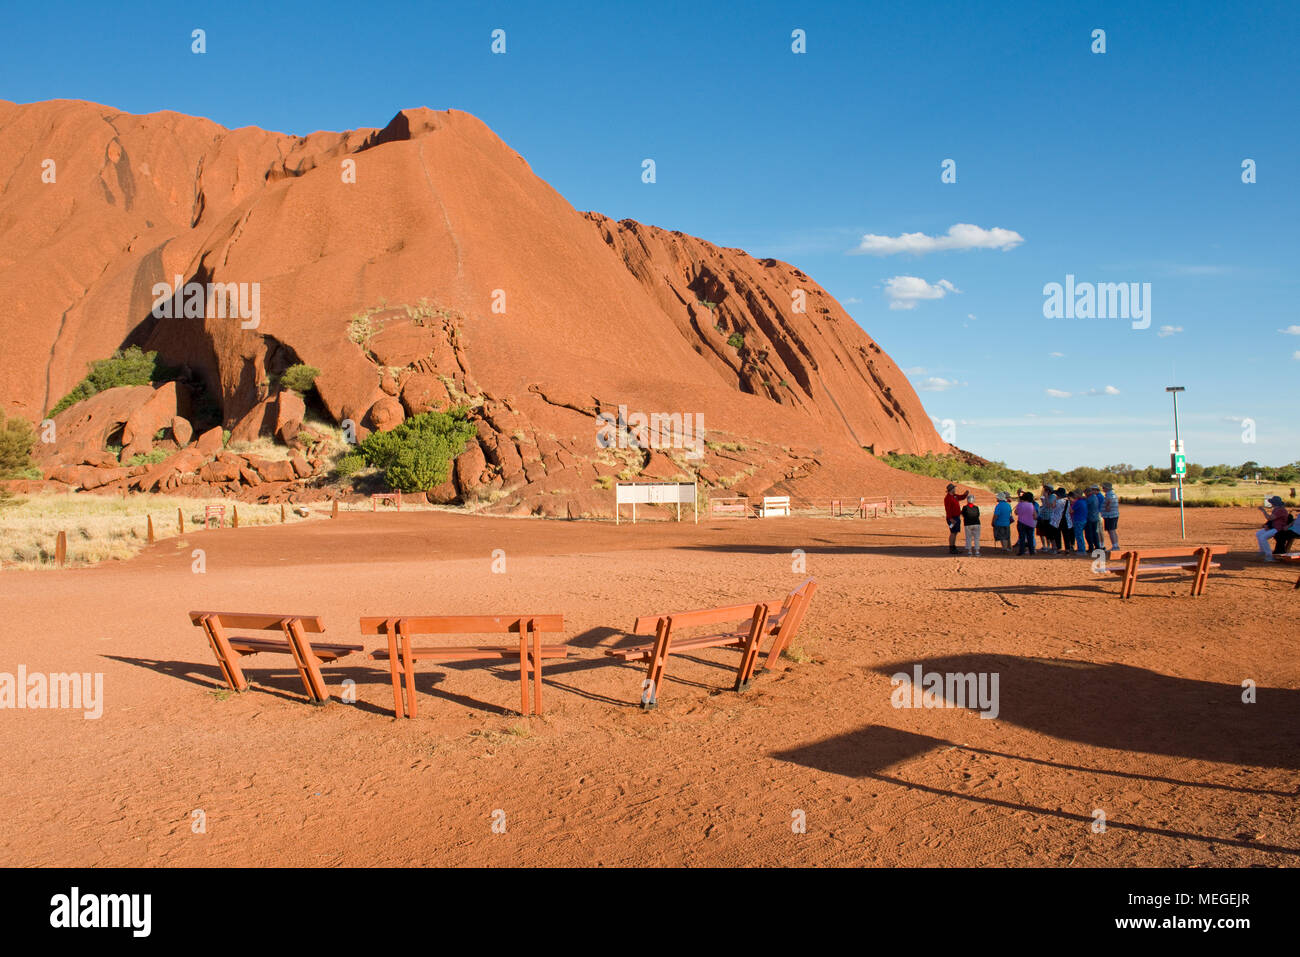 Footpath up Uluru (Ayers Rock). To respect Aboriginal culture, few people now climb the rock. Stock Photo